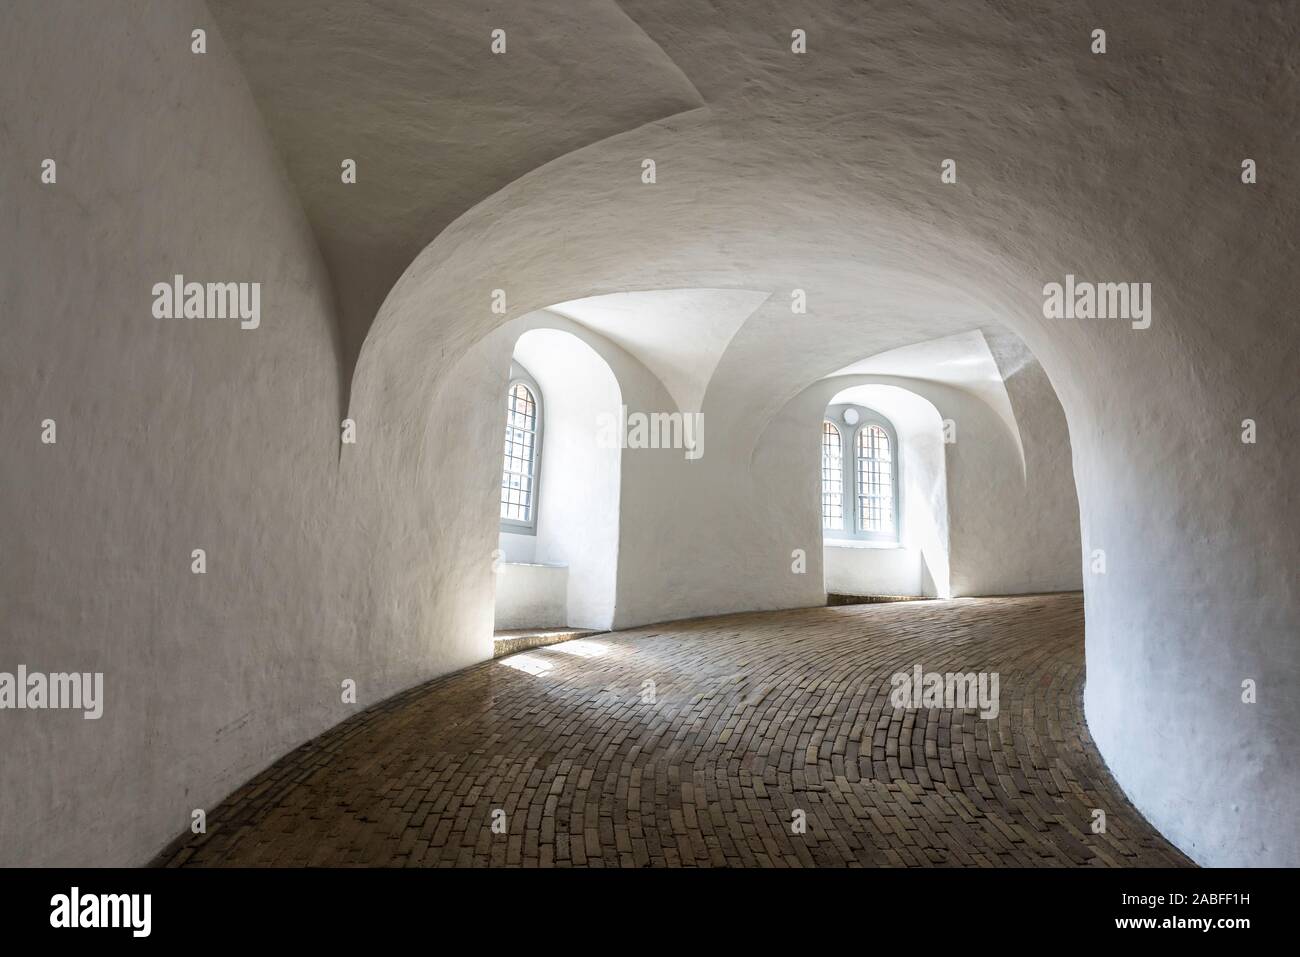 Copenhagen round tower, view of the famous equestrian staircase or helical ramp that takes visitors to the top of the Rundetårn in central Copenhagen Stock Photo